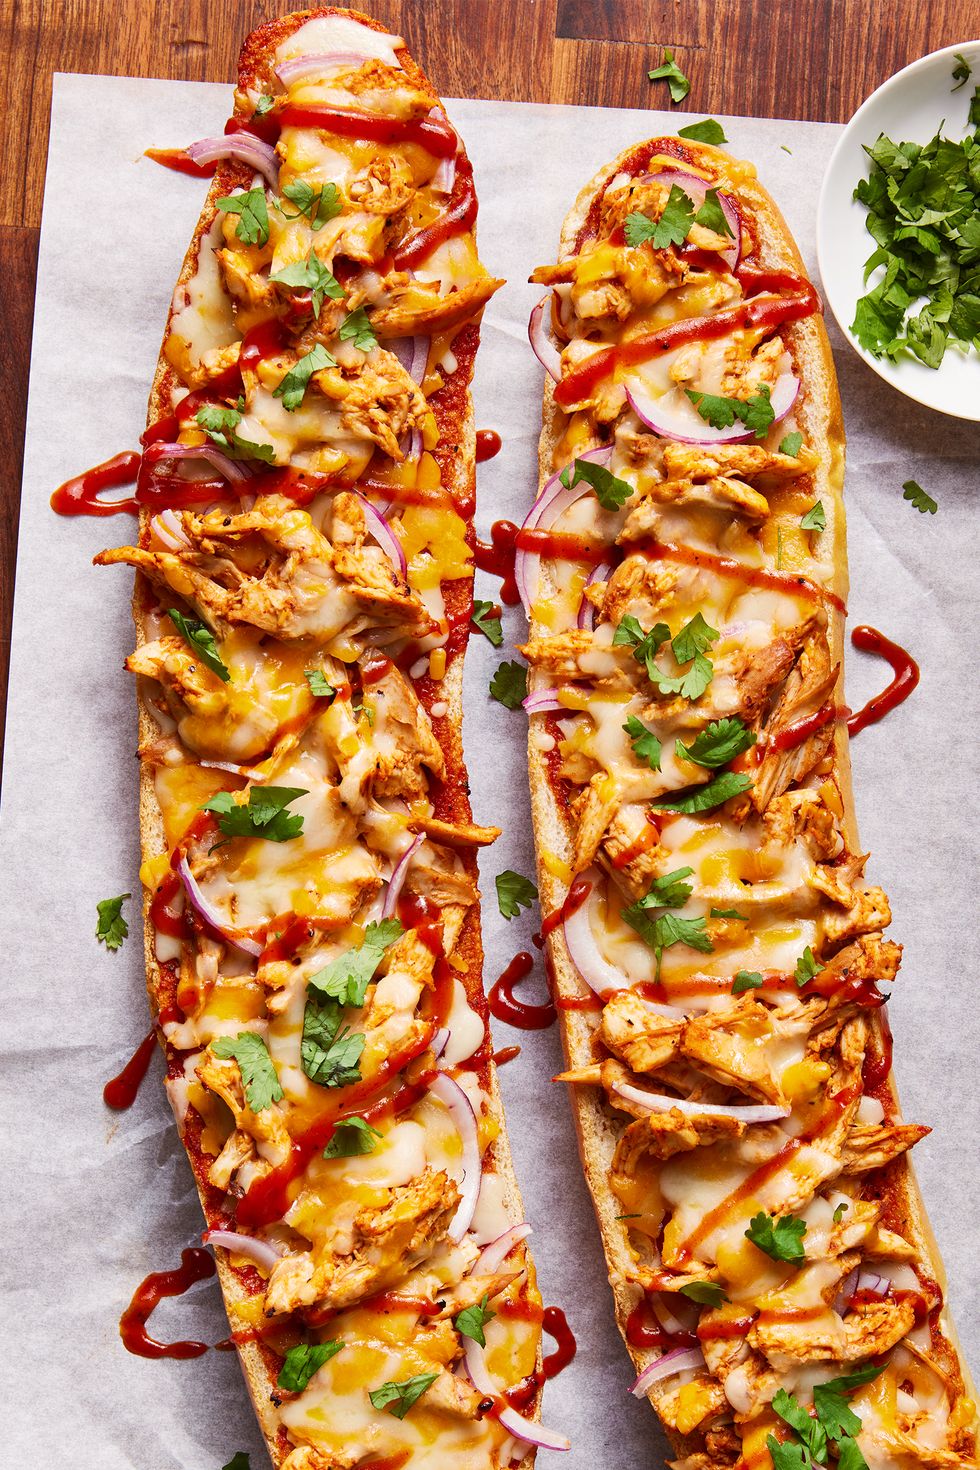 a loaf of french bread sliced in half and topped with shredded chicken, barbecue sauce, cheese, red onions, and cilantro